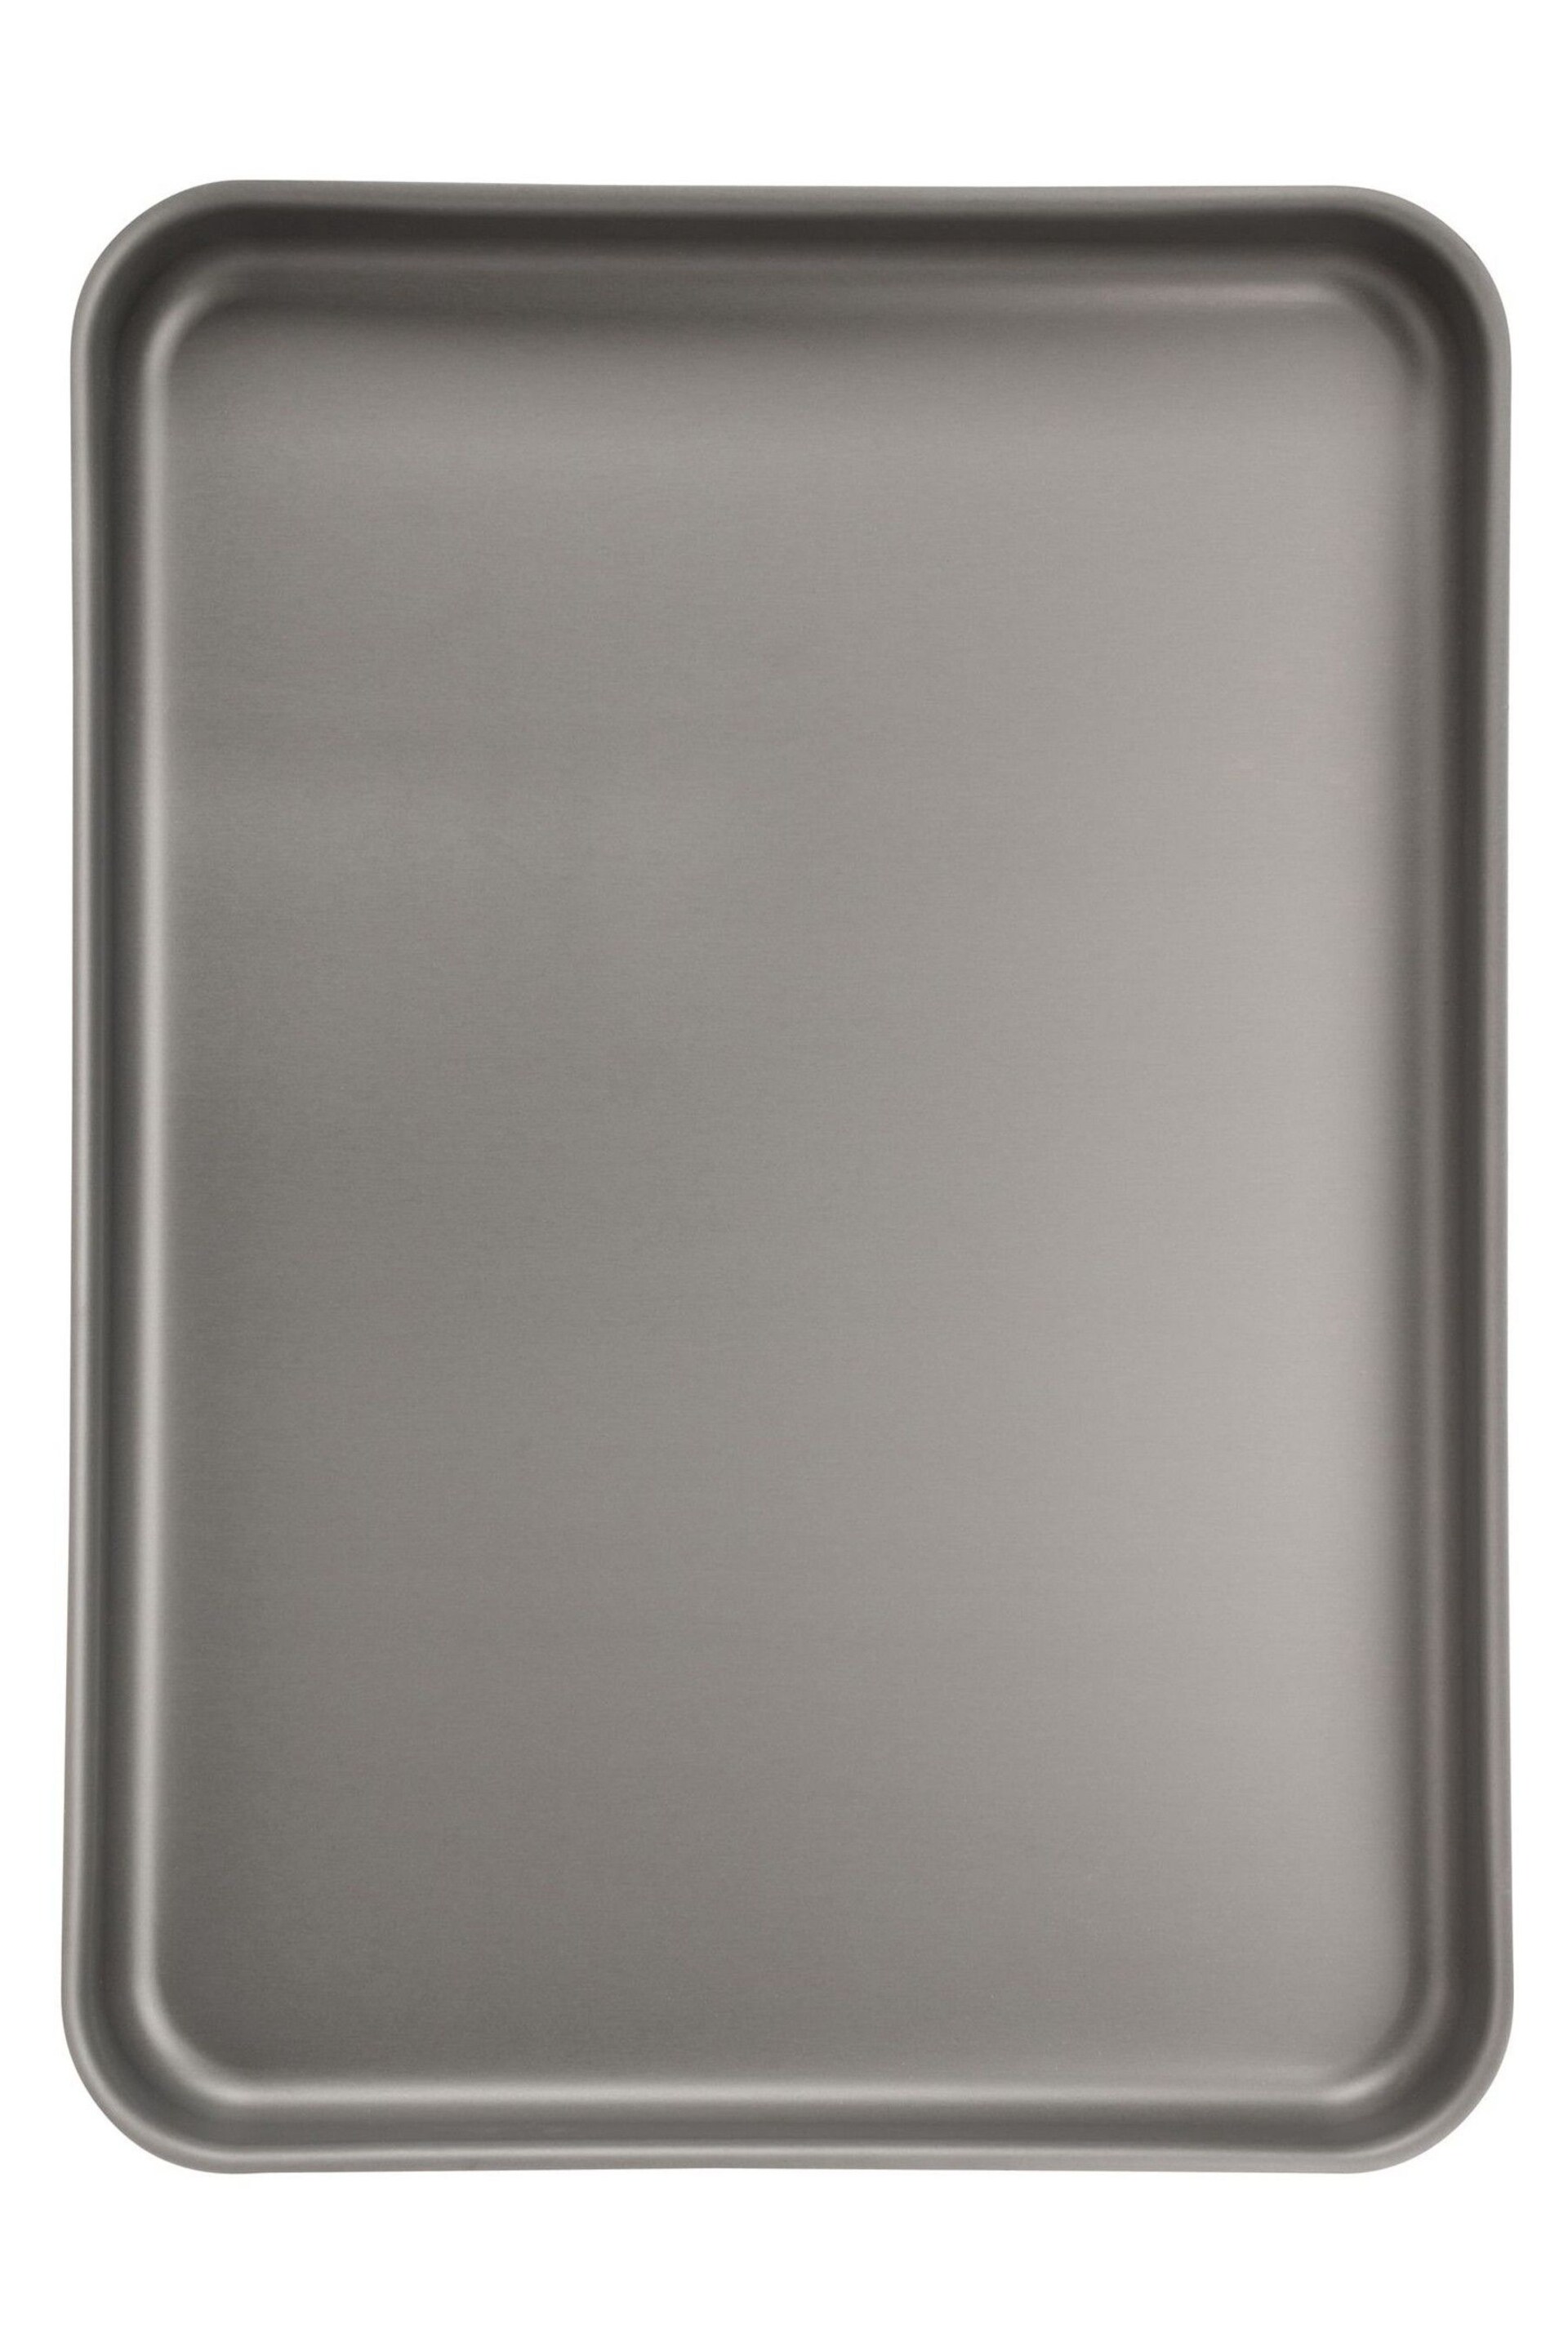 Luxe Grey 42cm Hard Anodised Deep Oven Tray - Image 3 of 4